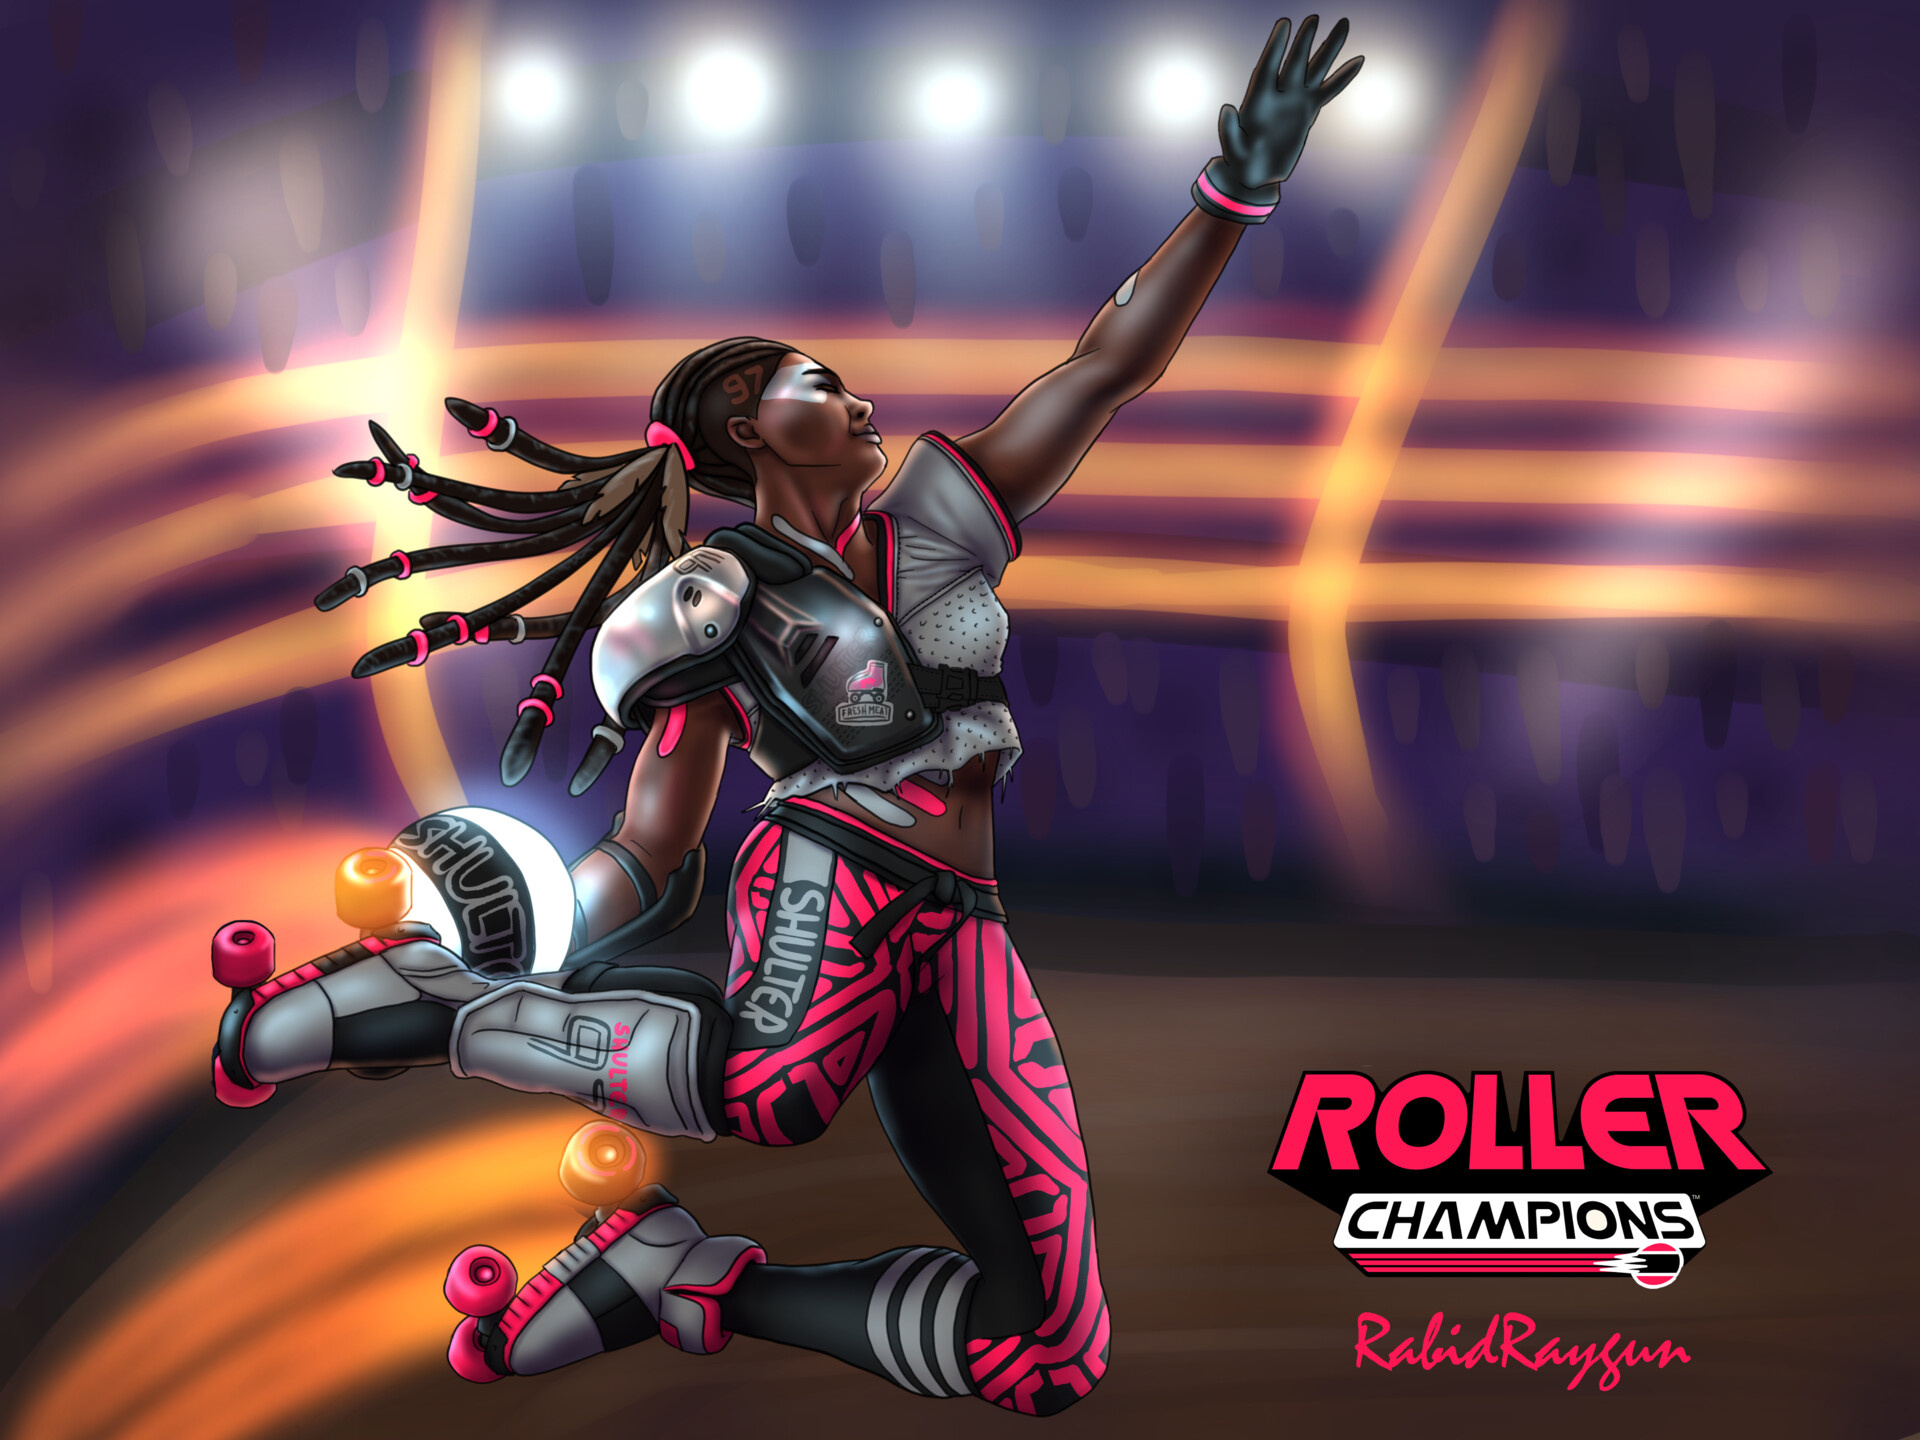 Roller Champions (Game): The rules: take the ball, make a lap while maintaining team possession, dodge opponents, and score. 1920x1440 HD Wallpaper.